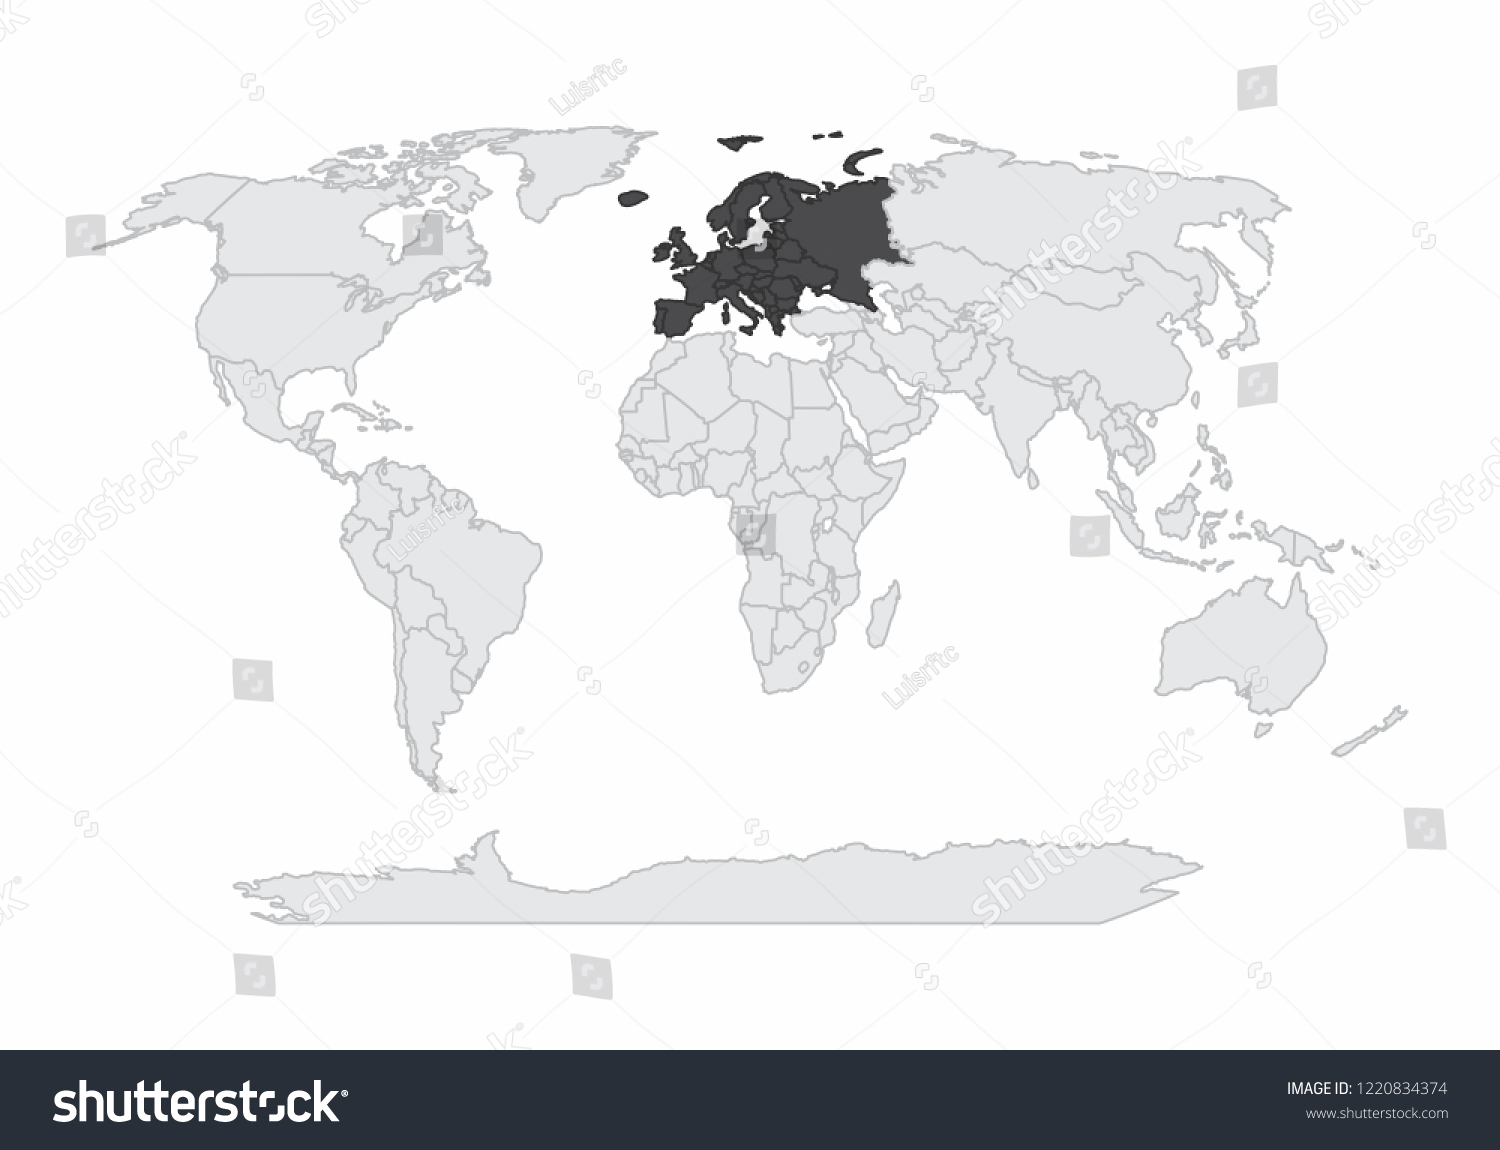 World Map With Europe Highlighted World Map Illustration European Continent Highlight Stock Illustration  1220834374 | Shutterstock